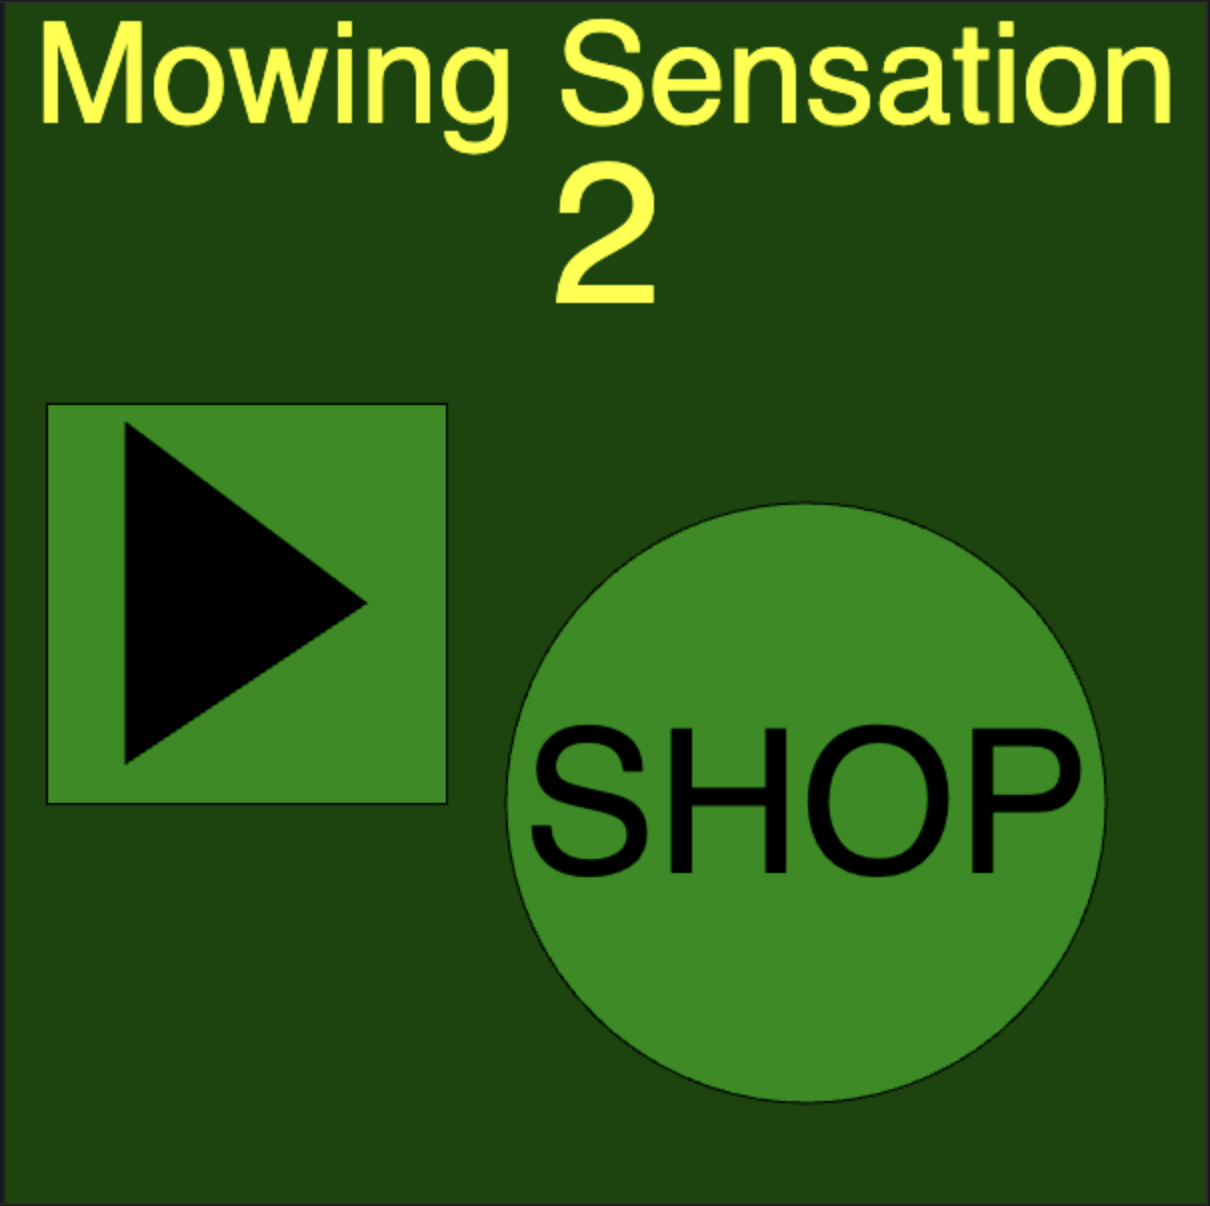 Picture of Mowing Sensation 2 homepage